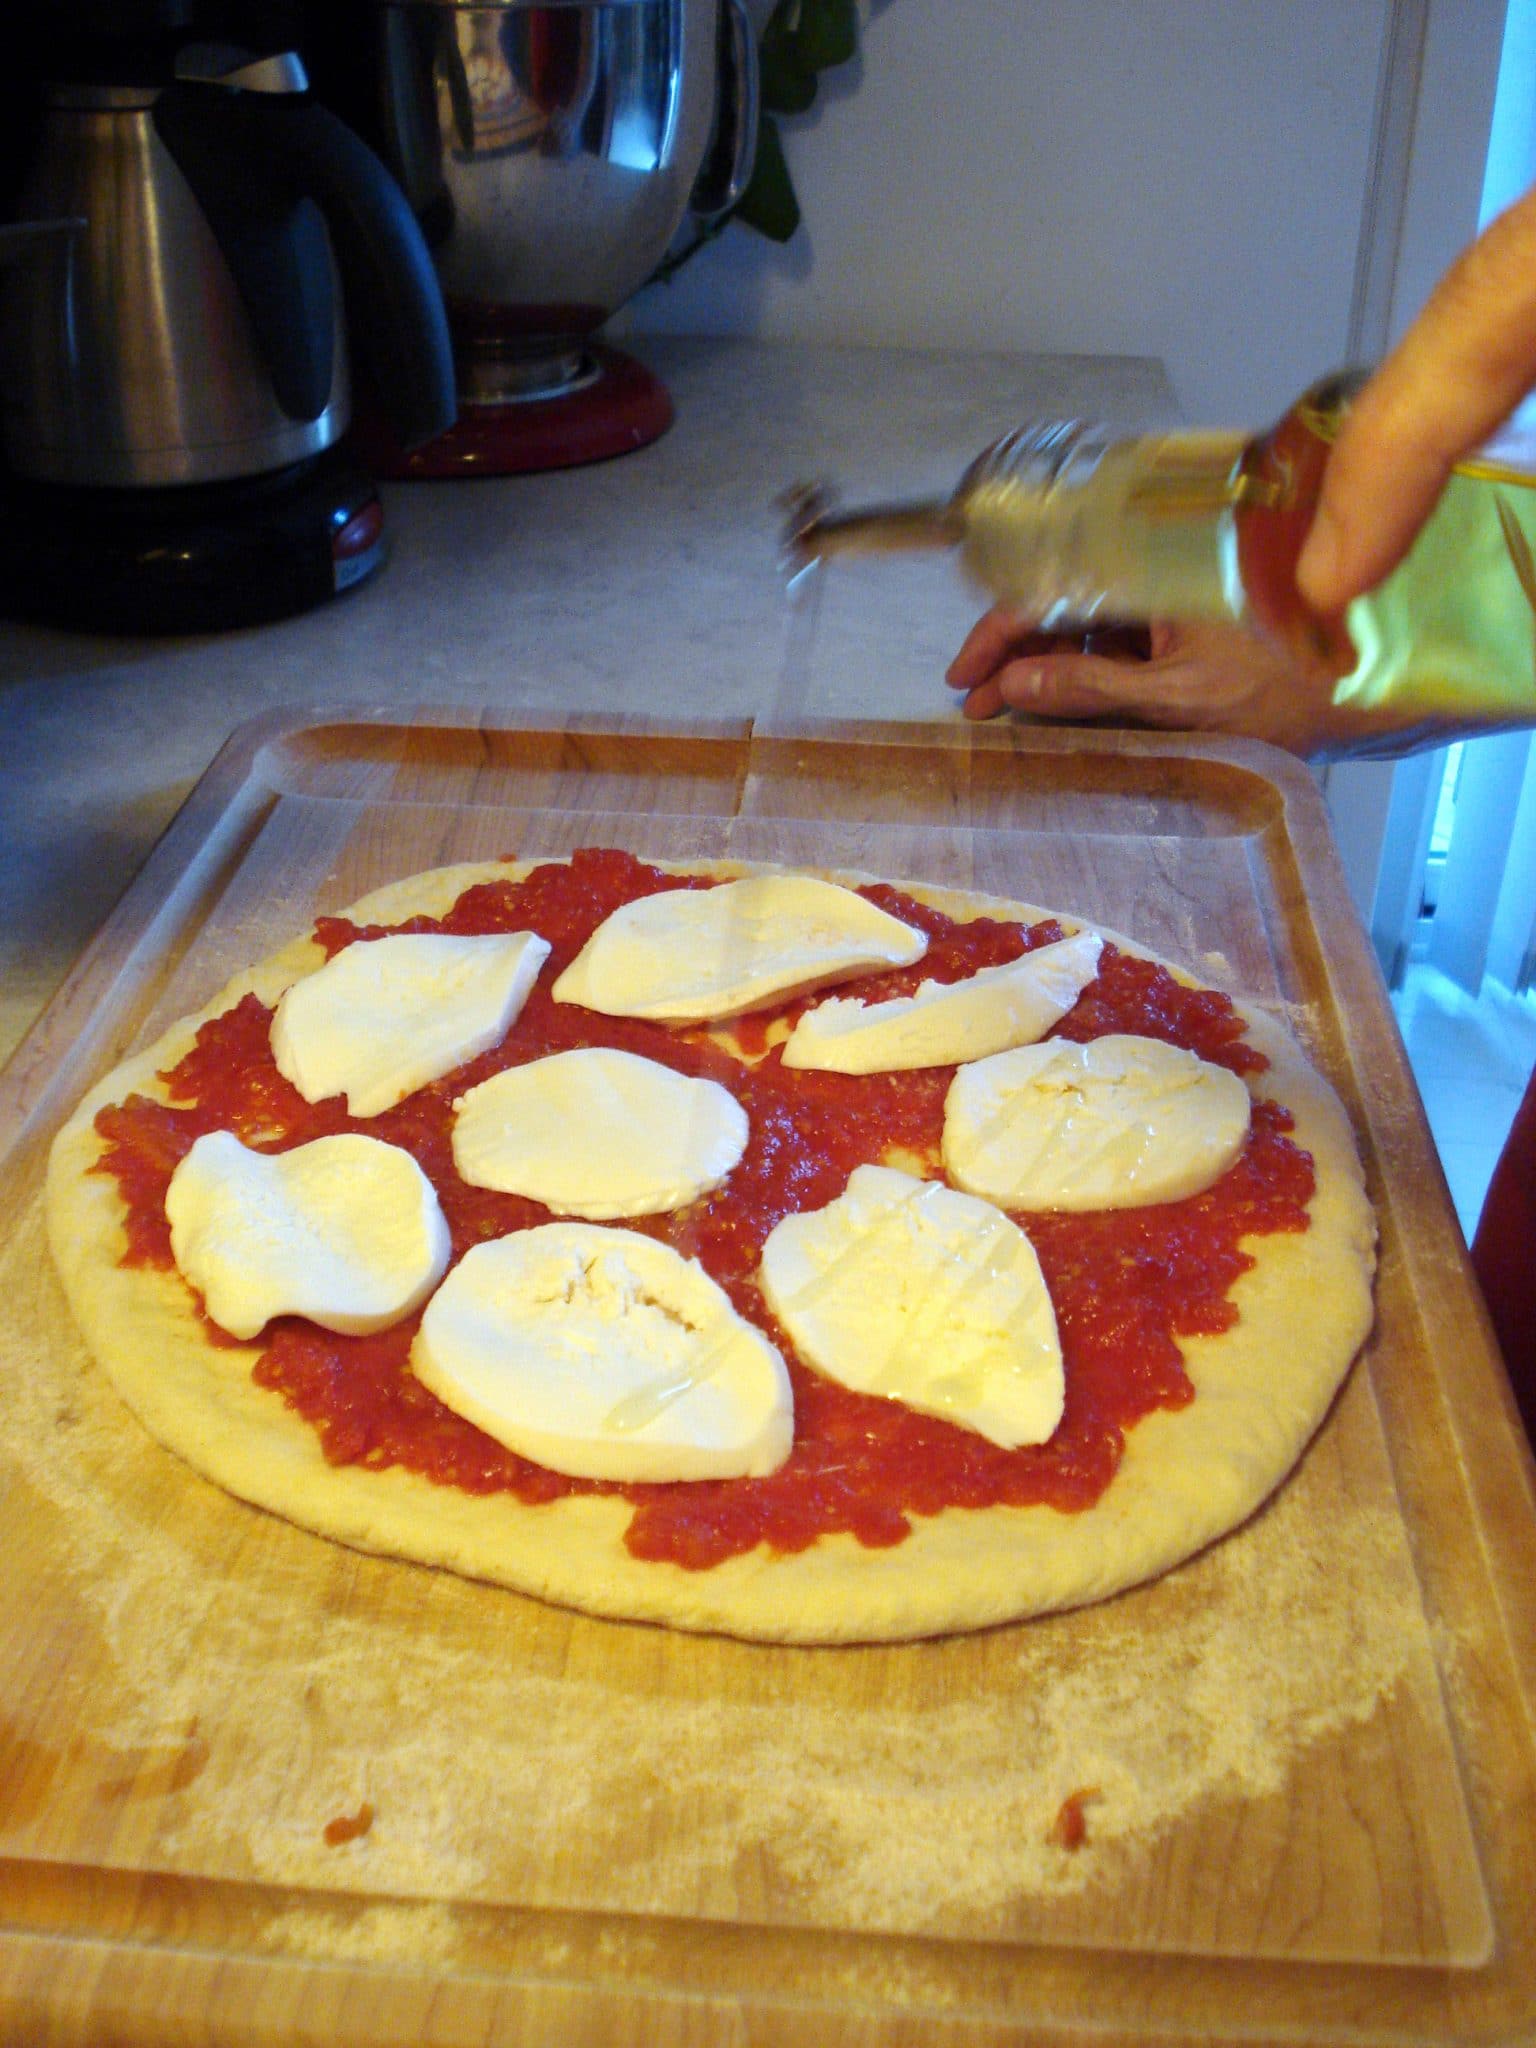 Uncooked pizza, receiving a drizzle of olive oil